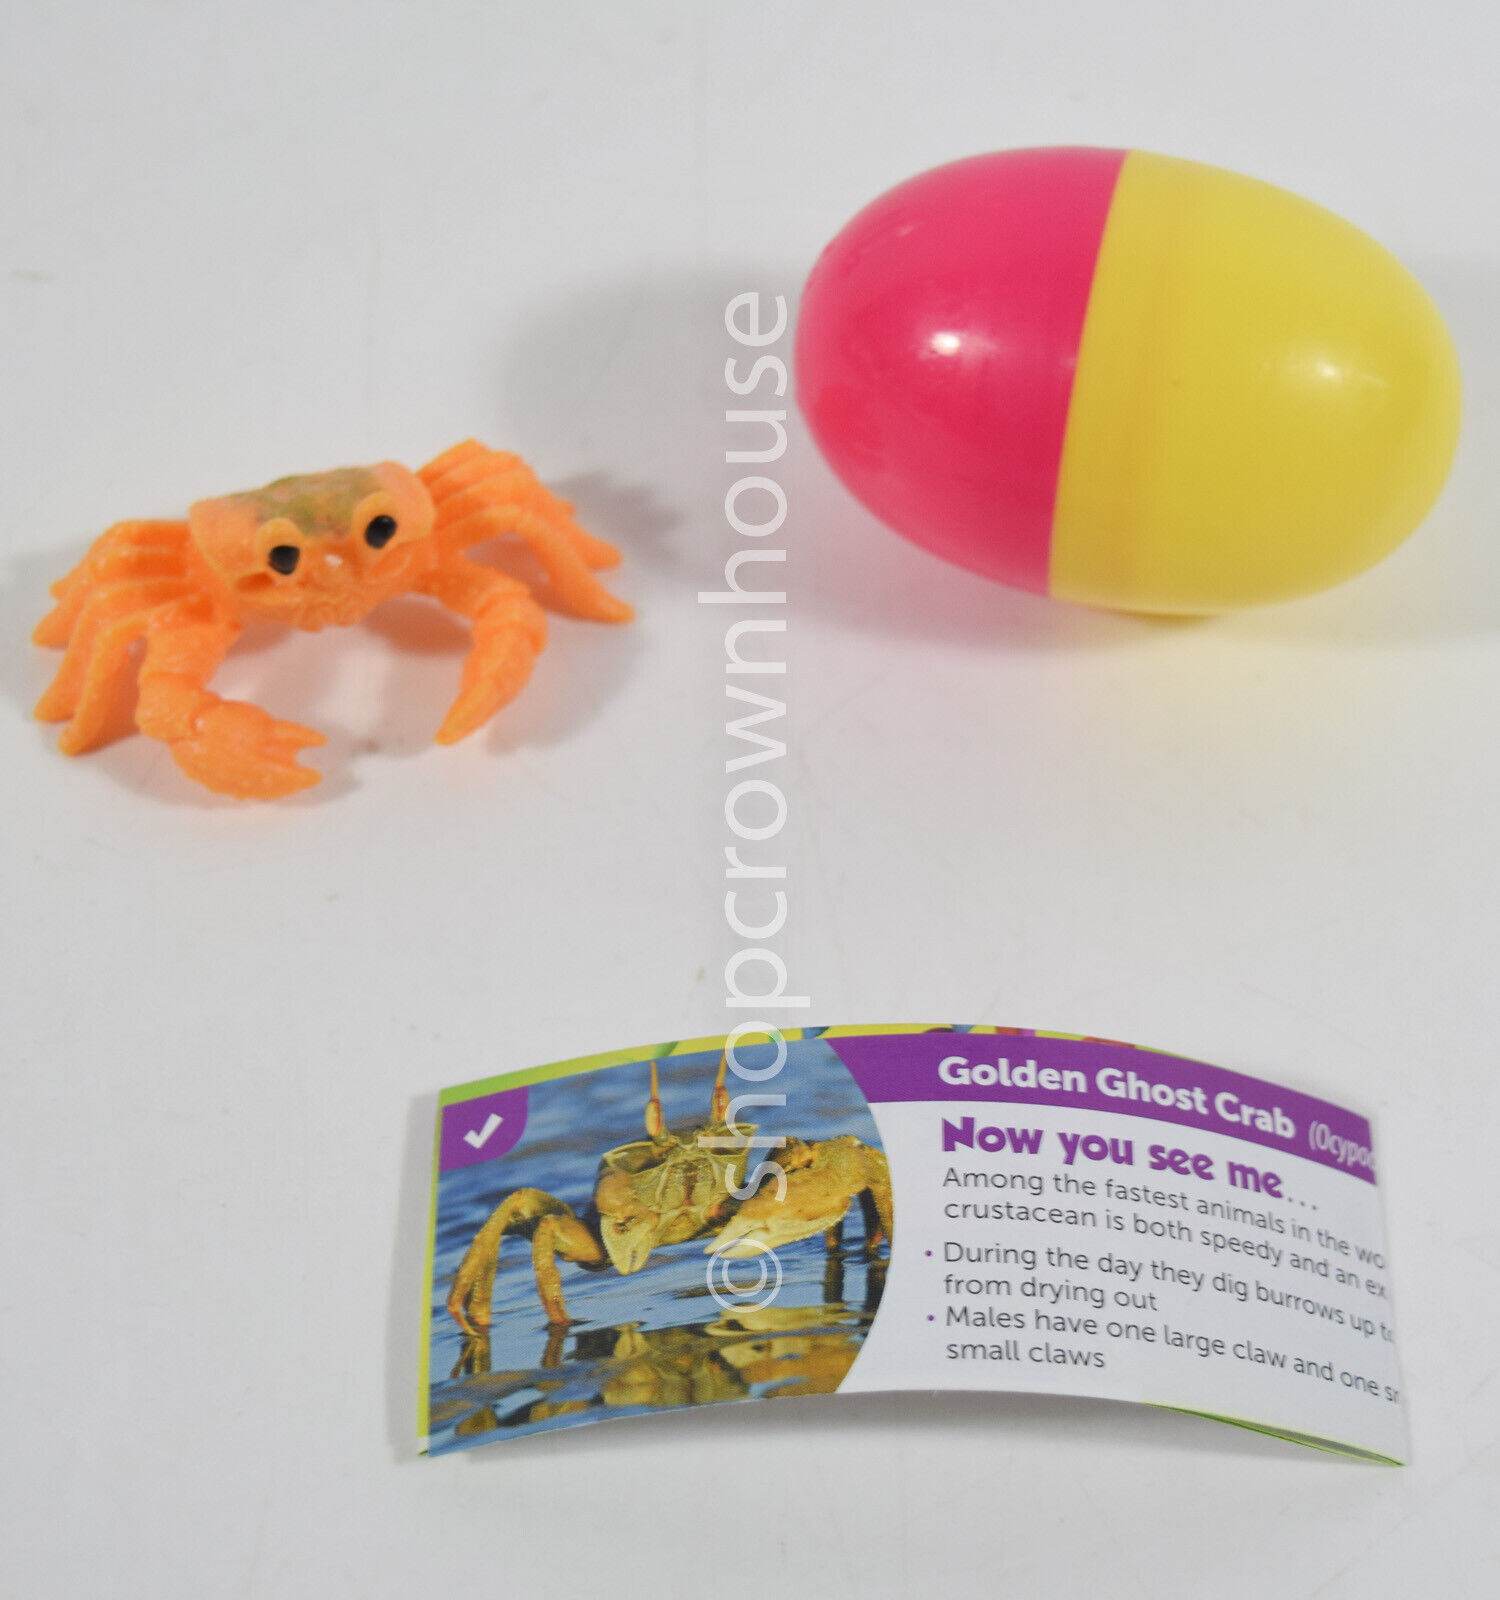 Yowie Endangered Species Mini Collectible Figurine w/ Egg - GOLDEN GHOST CRAB